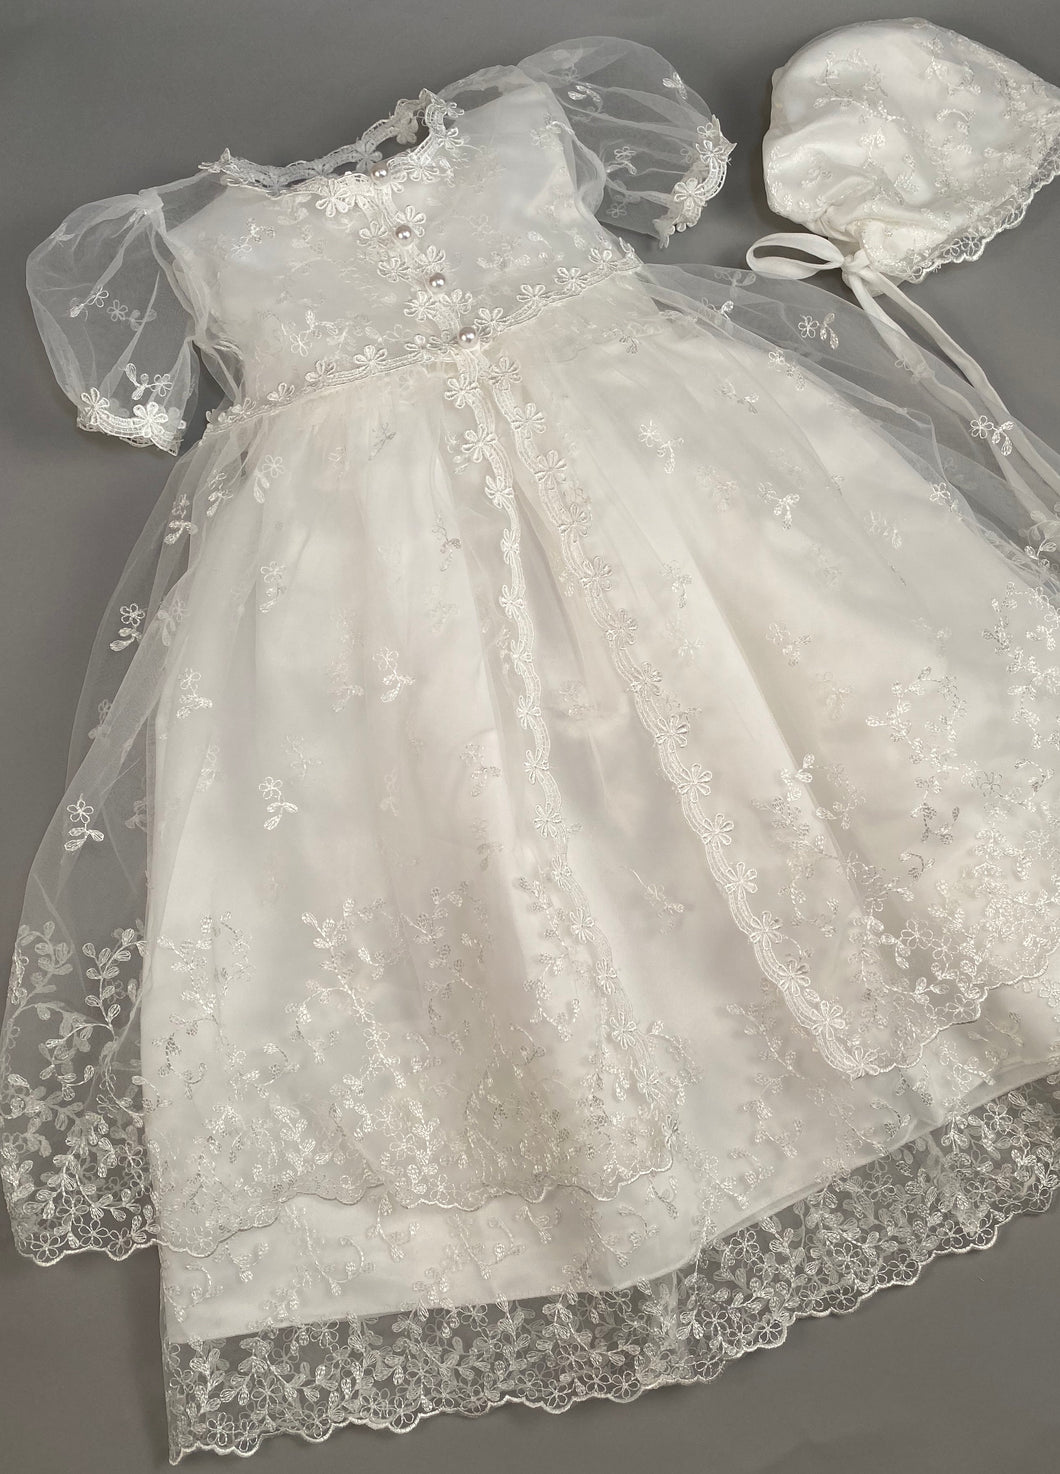 Lace Gown 2 Girls Christening Baptismal Embroidered Lace Gown with Matching Cape and Hat